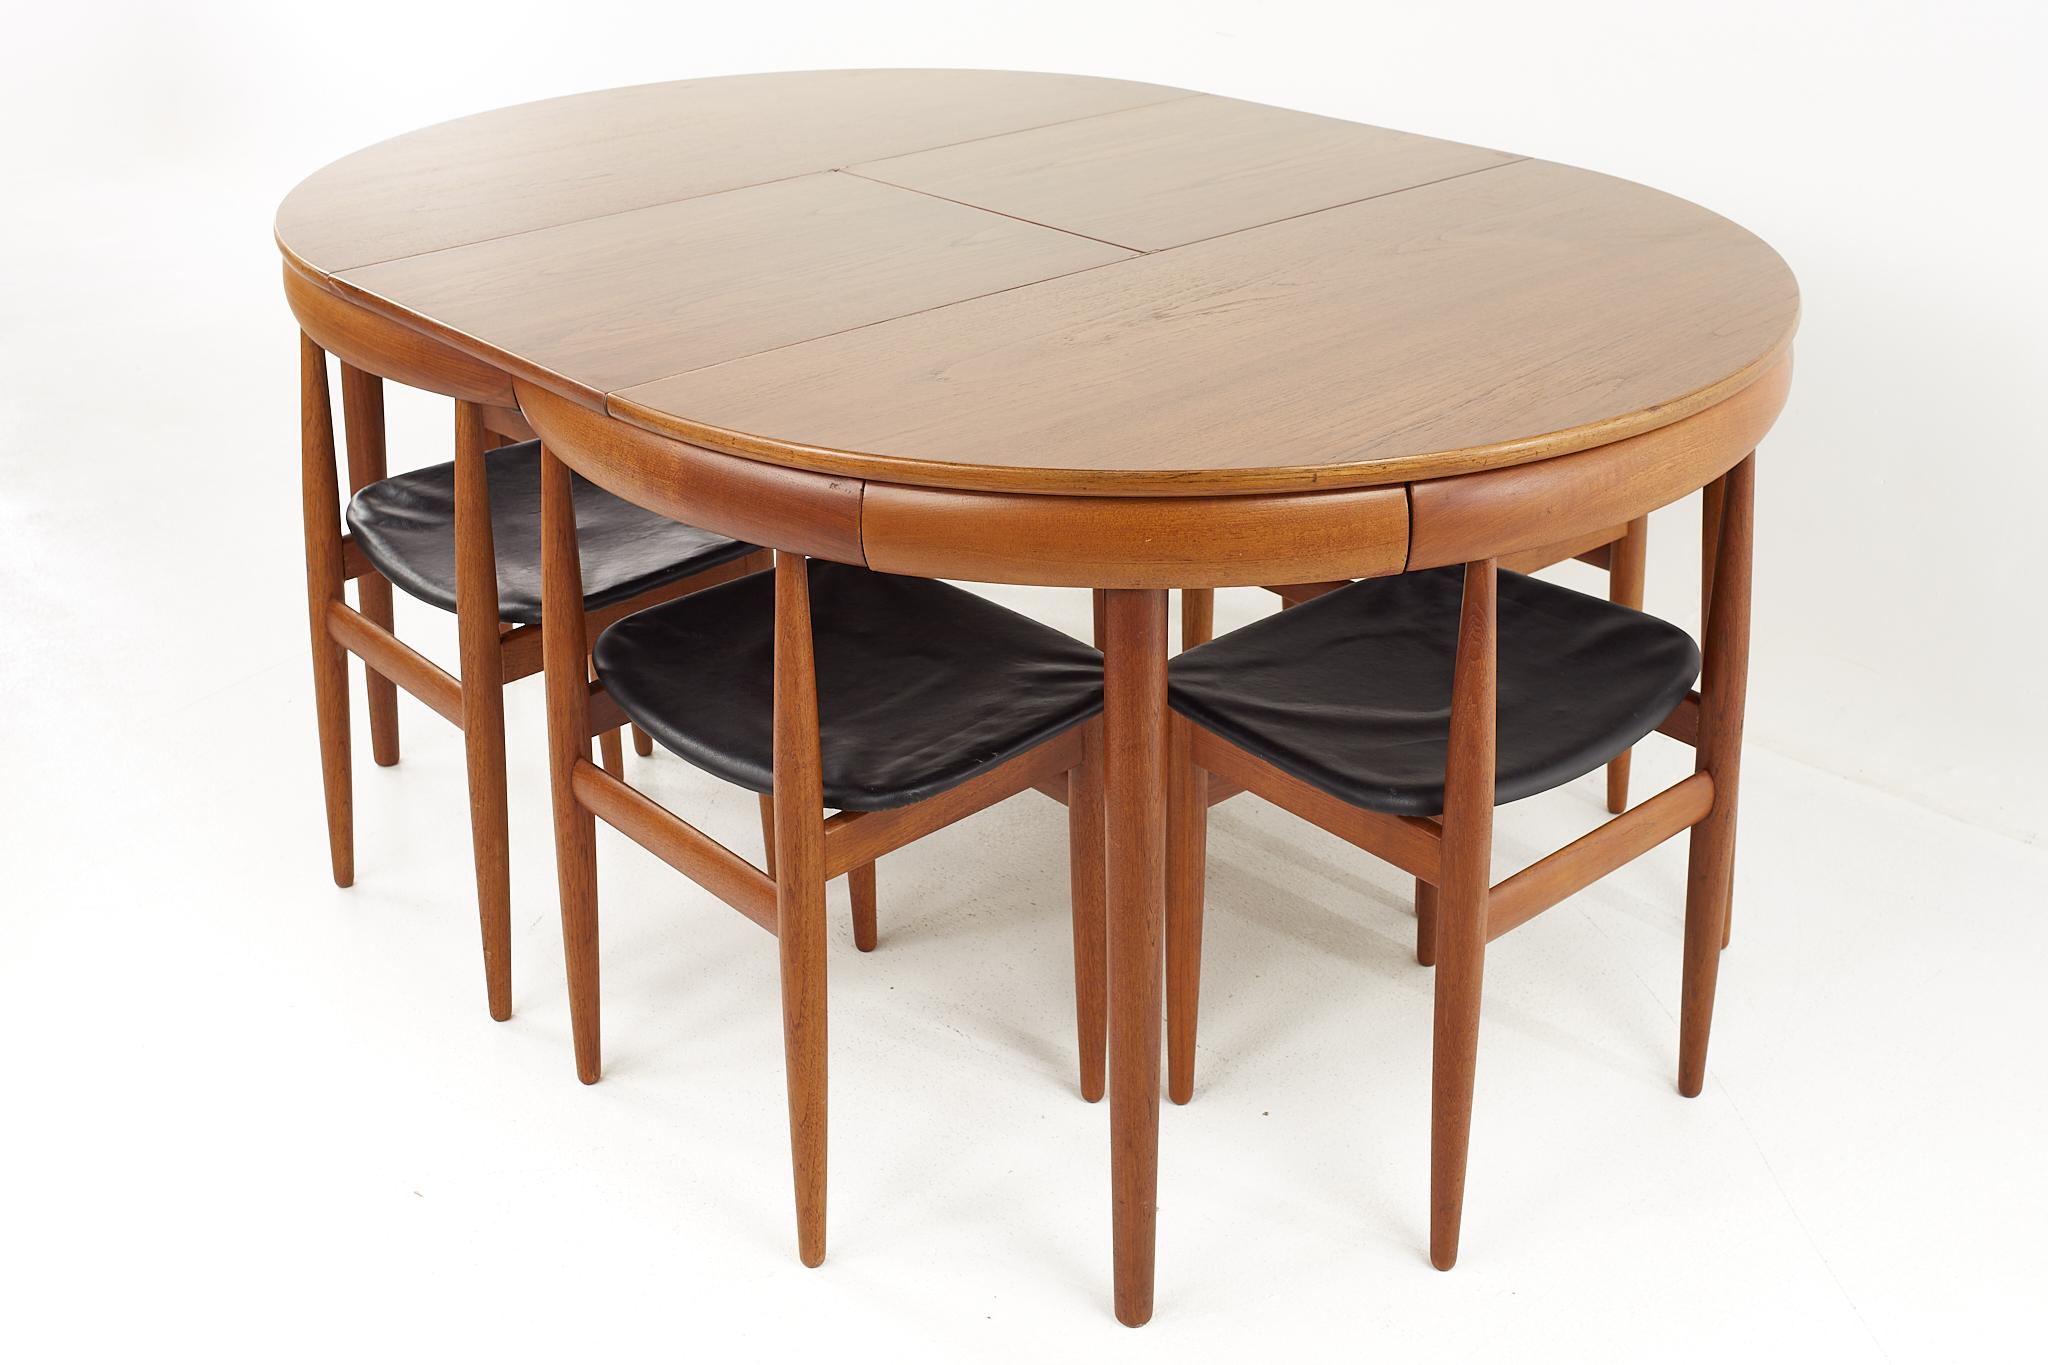 Late 20th Century Frem Rojle Mid-Century Teak Hidden Leaf Dining Table with 6 Nesting Chairs